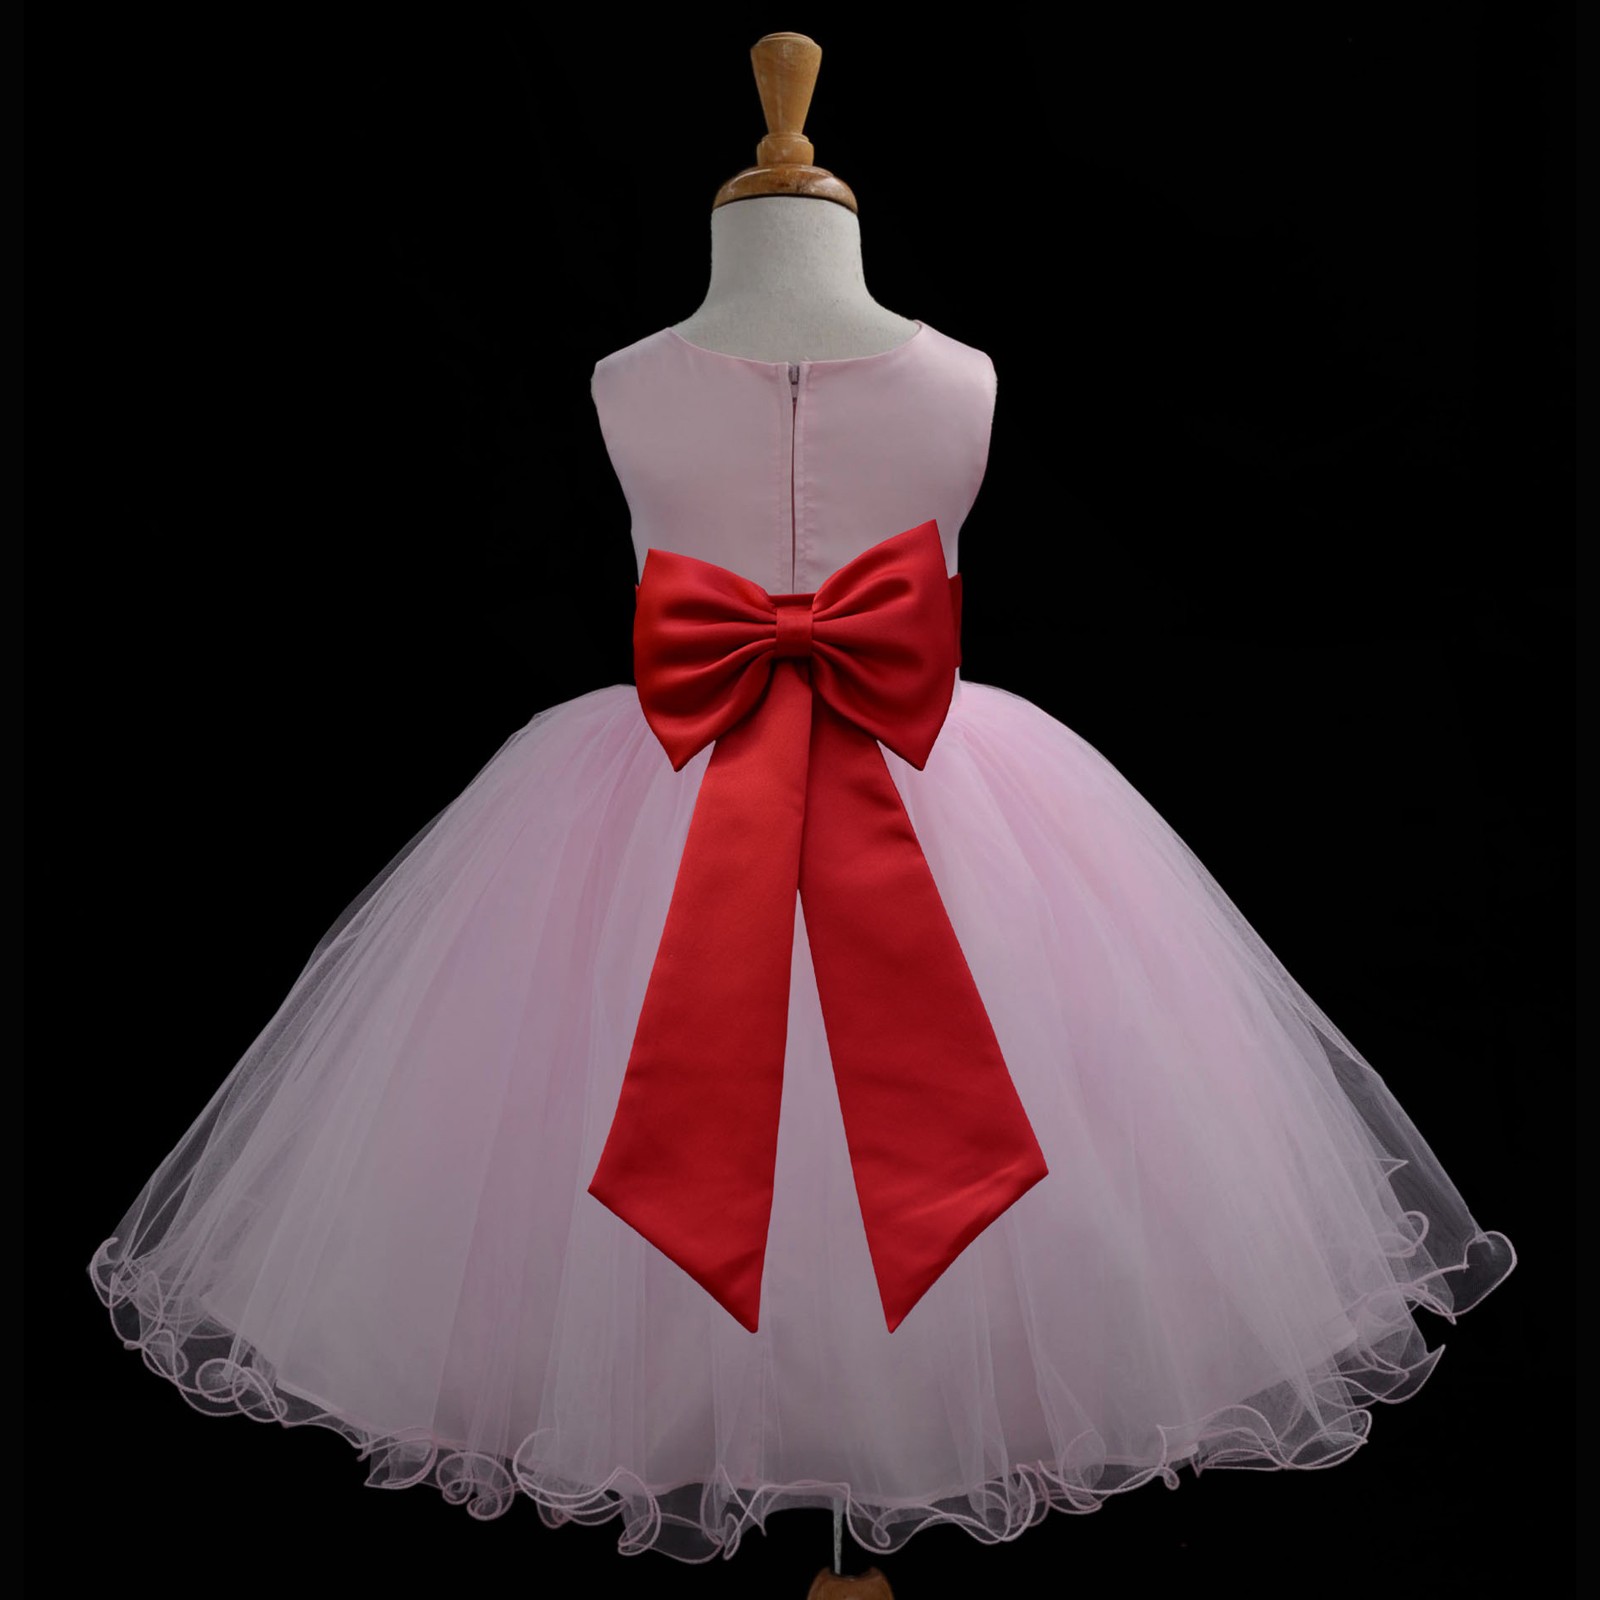 Pink/Red Tulle Rattail Edge Flower Girl Dress Fairy Princess 829T